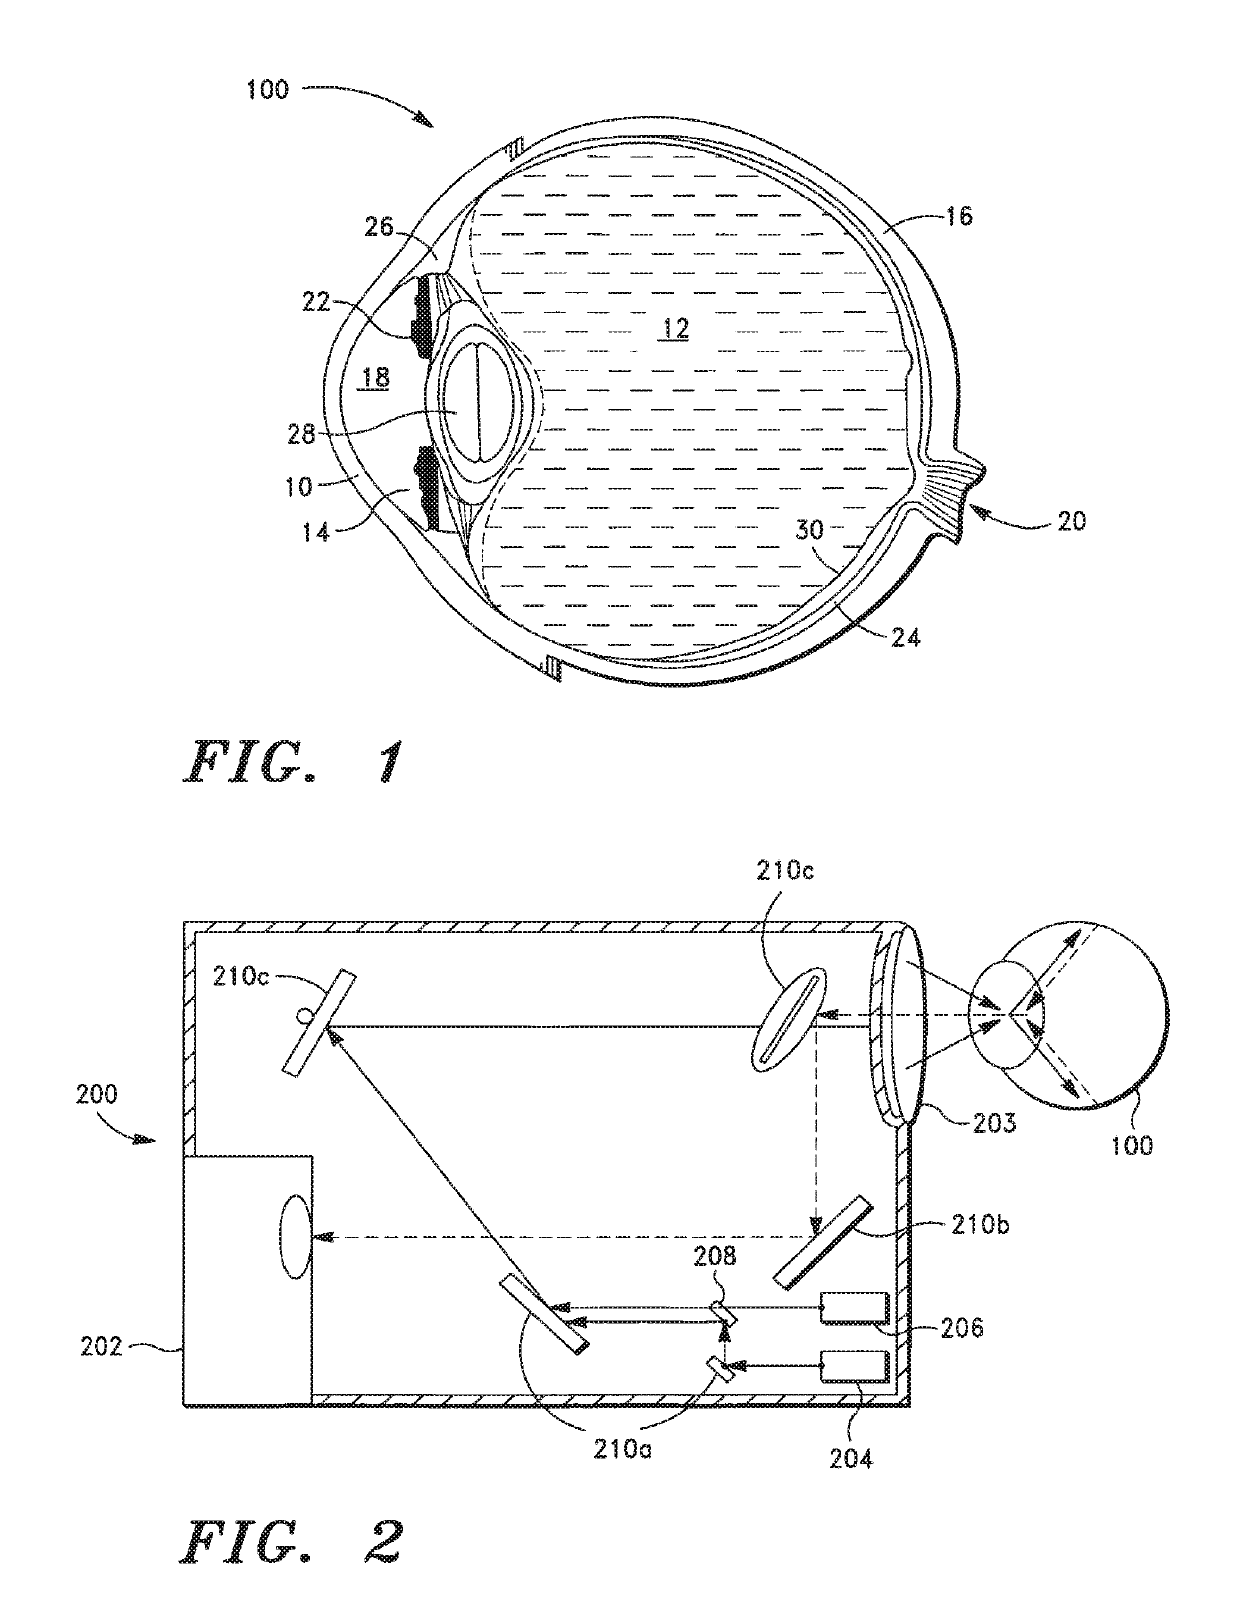 Remote laser treatment system with dynamic imaging